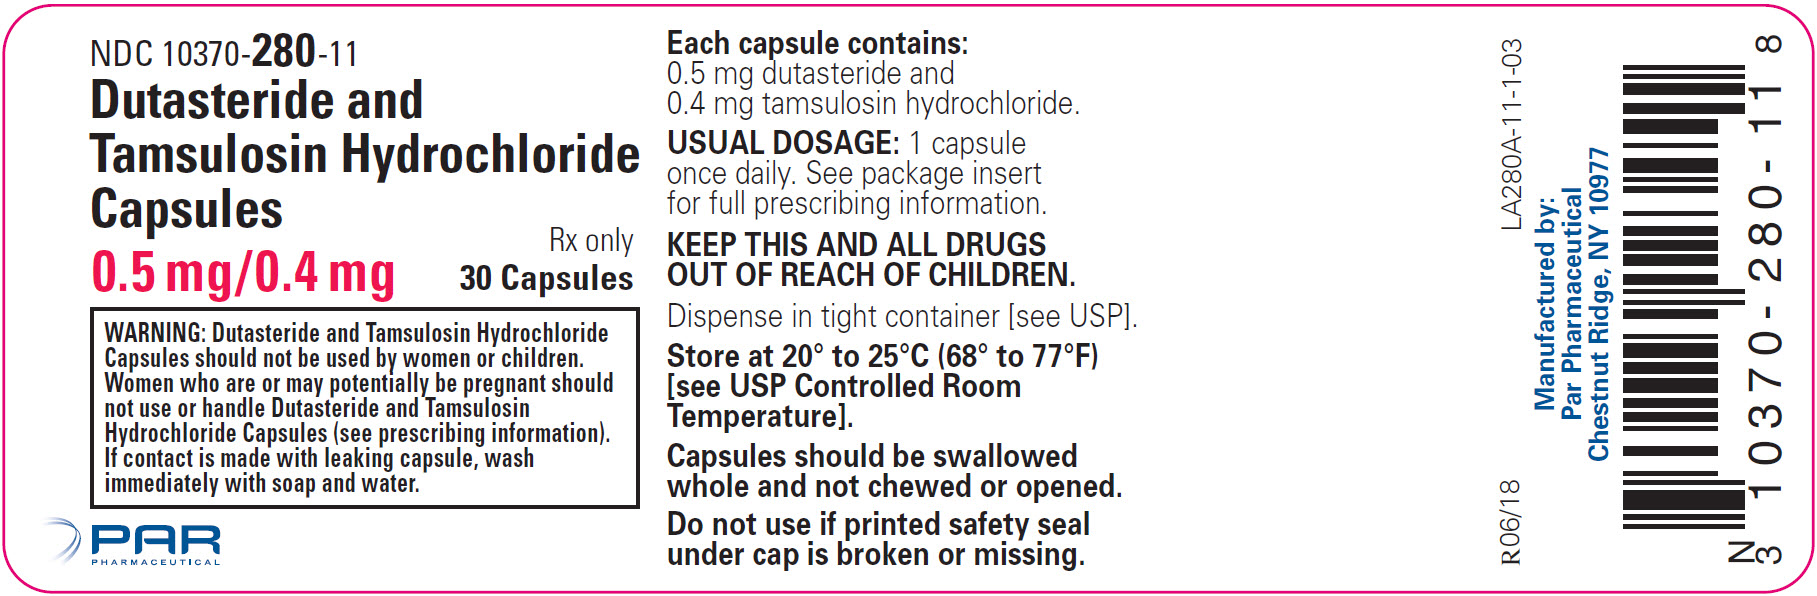 NDC 10370-280-11 Dutasteride and Tamsulosin Hydrochloride Capsules 0.5mg/0.4 mg 30-count Rx Only